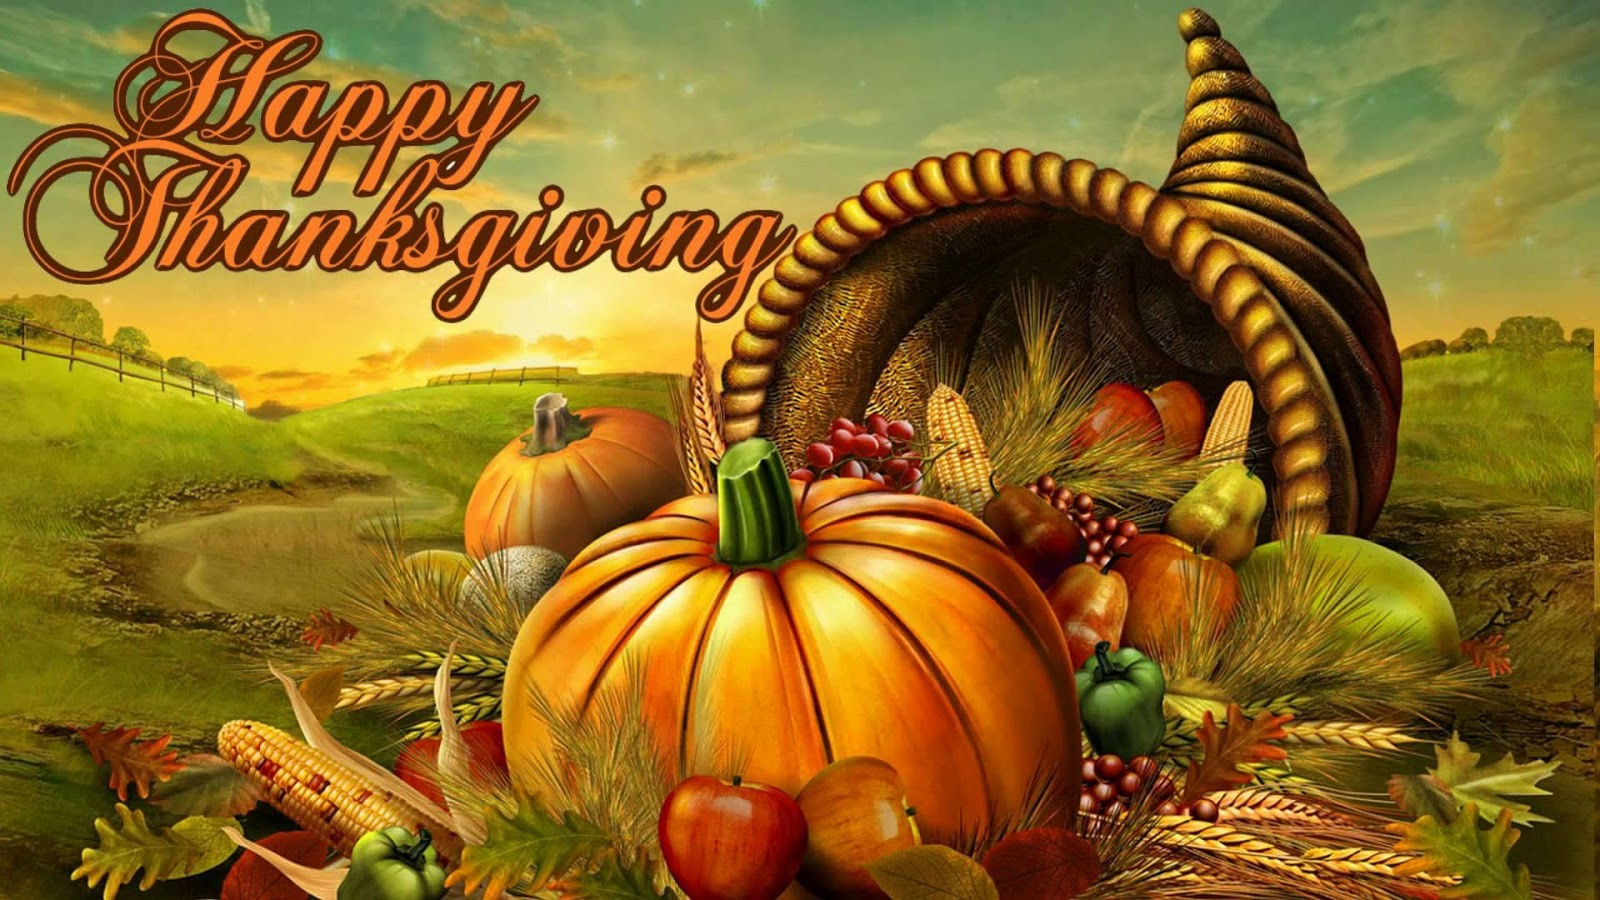 Thanksgiving Turkey Wallpaper
 Buckaroo Leather Horse Tack Use Care and Maintenance